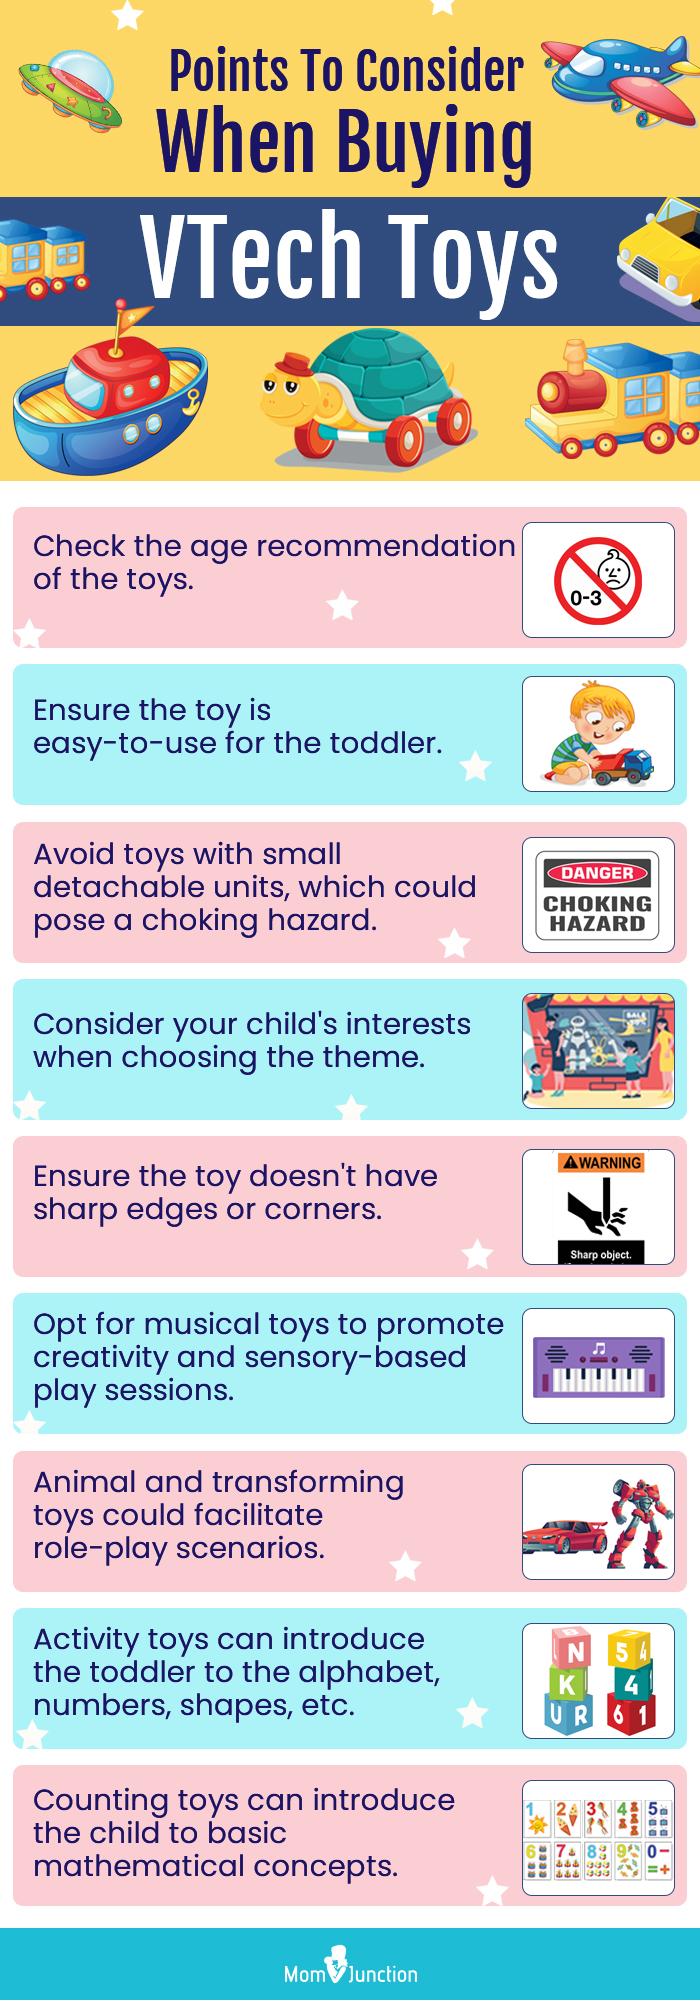 Points To Consider When Buying VTech Toys (infographic)